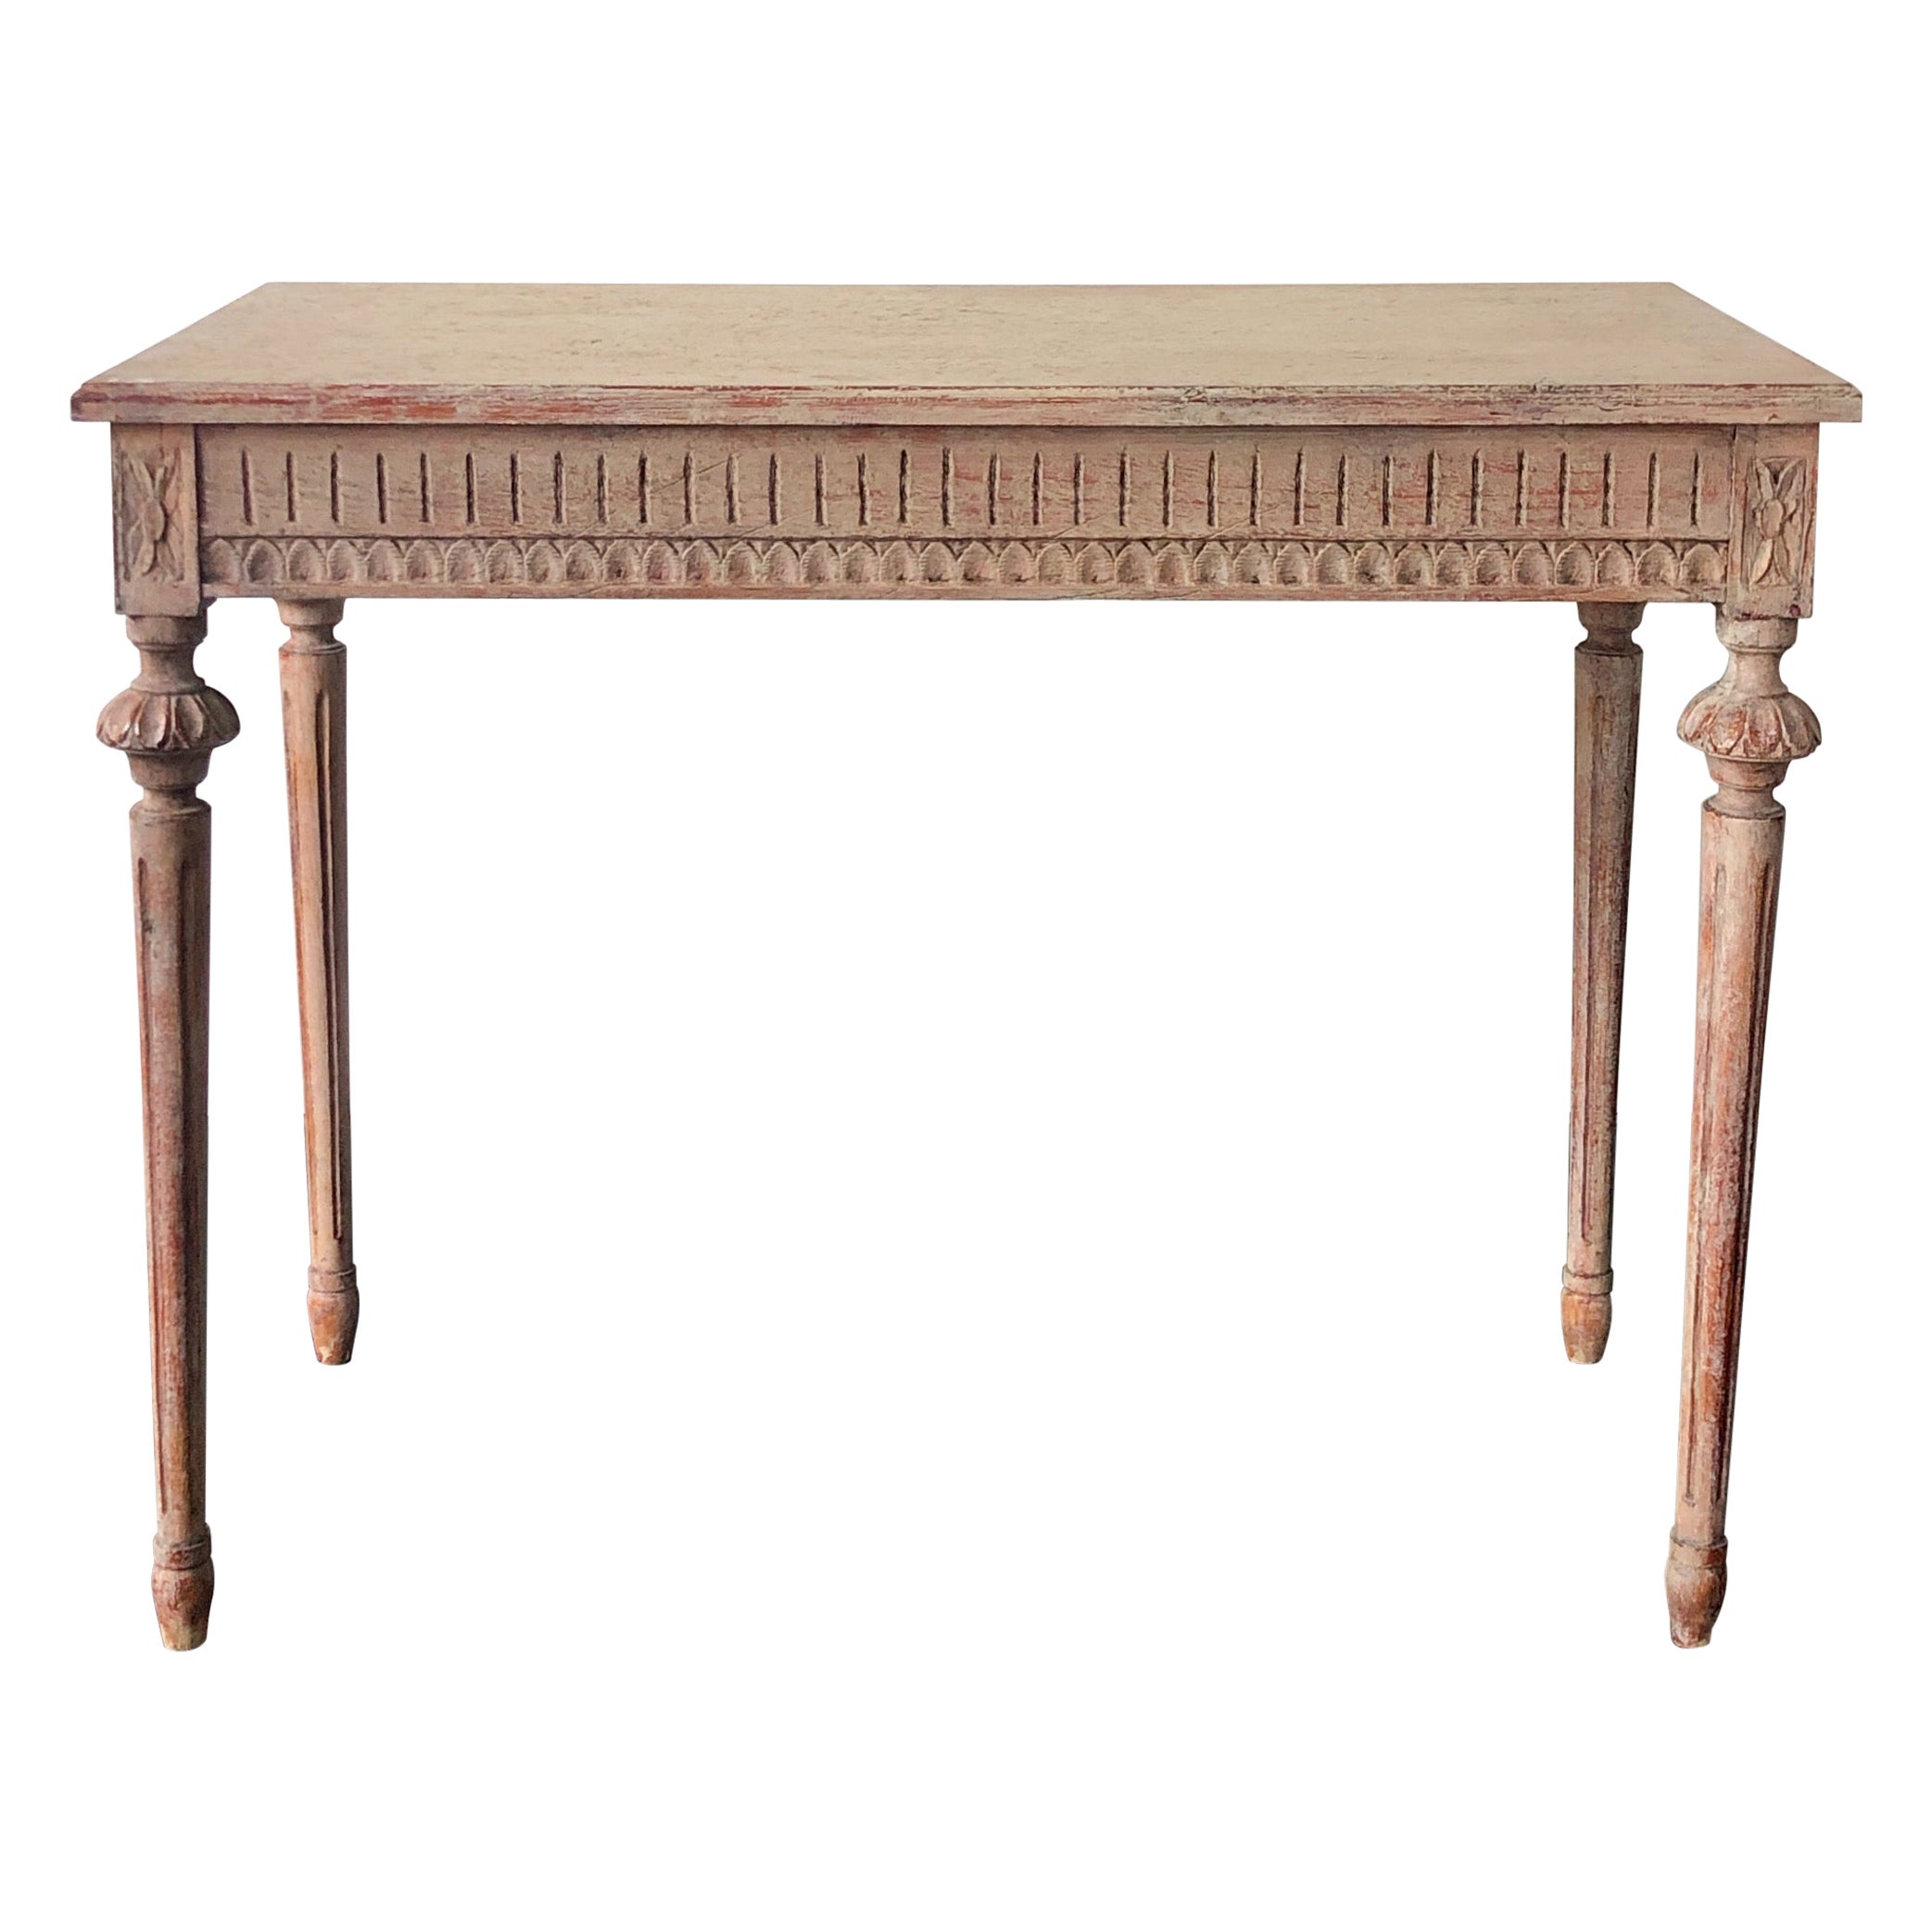 Early 19th Century Swedish Gustavian Period Freestanding Console Table